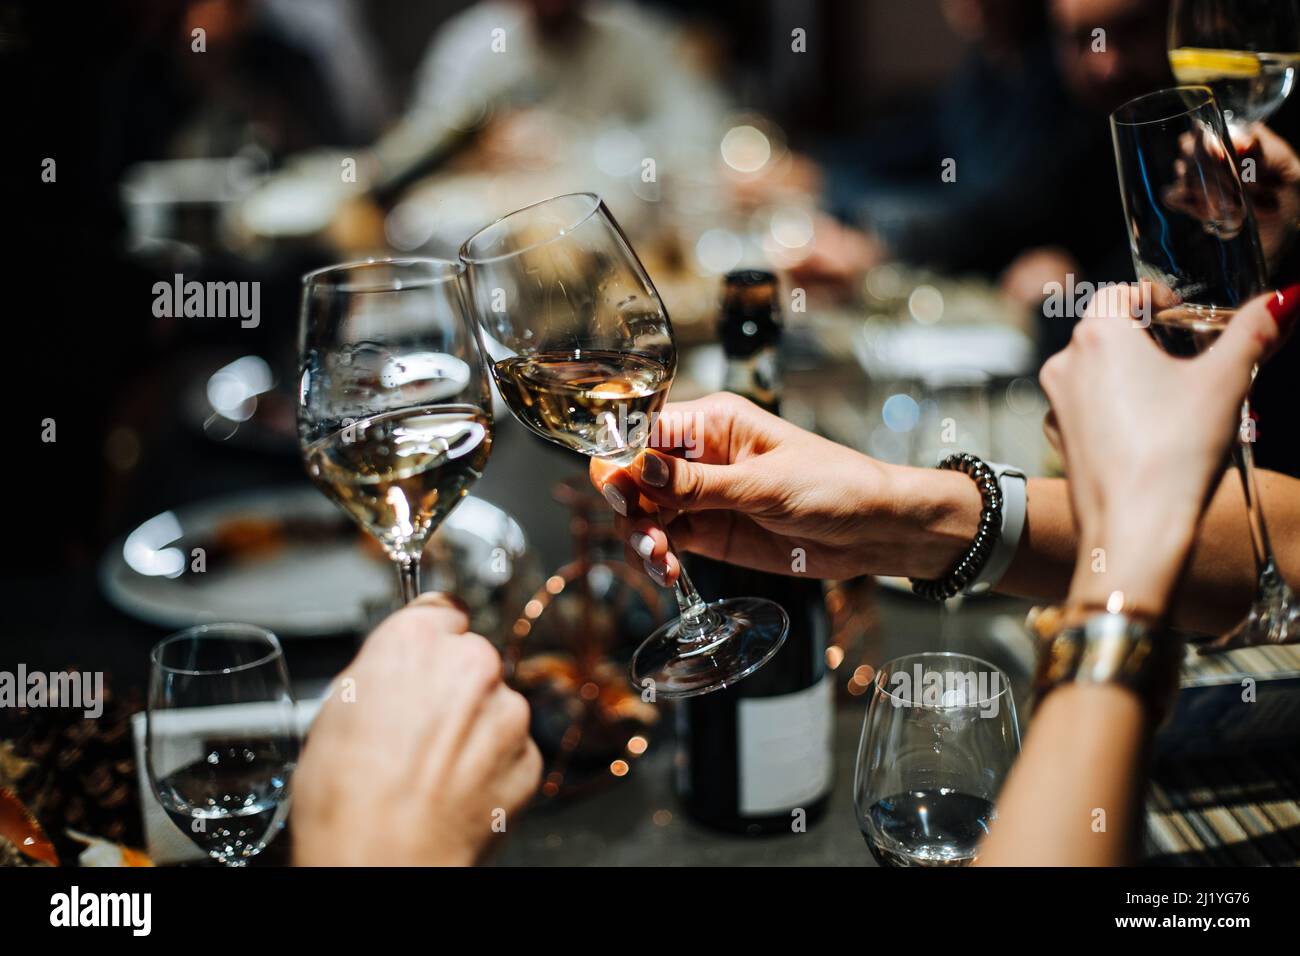 Champagne Glasses And Glasses Of Wine In Hands Of People At Party People Clinking Glasses With